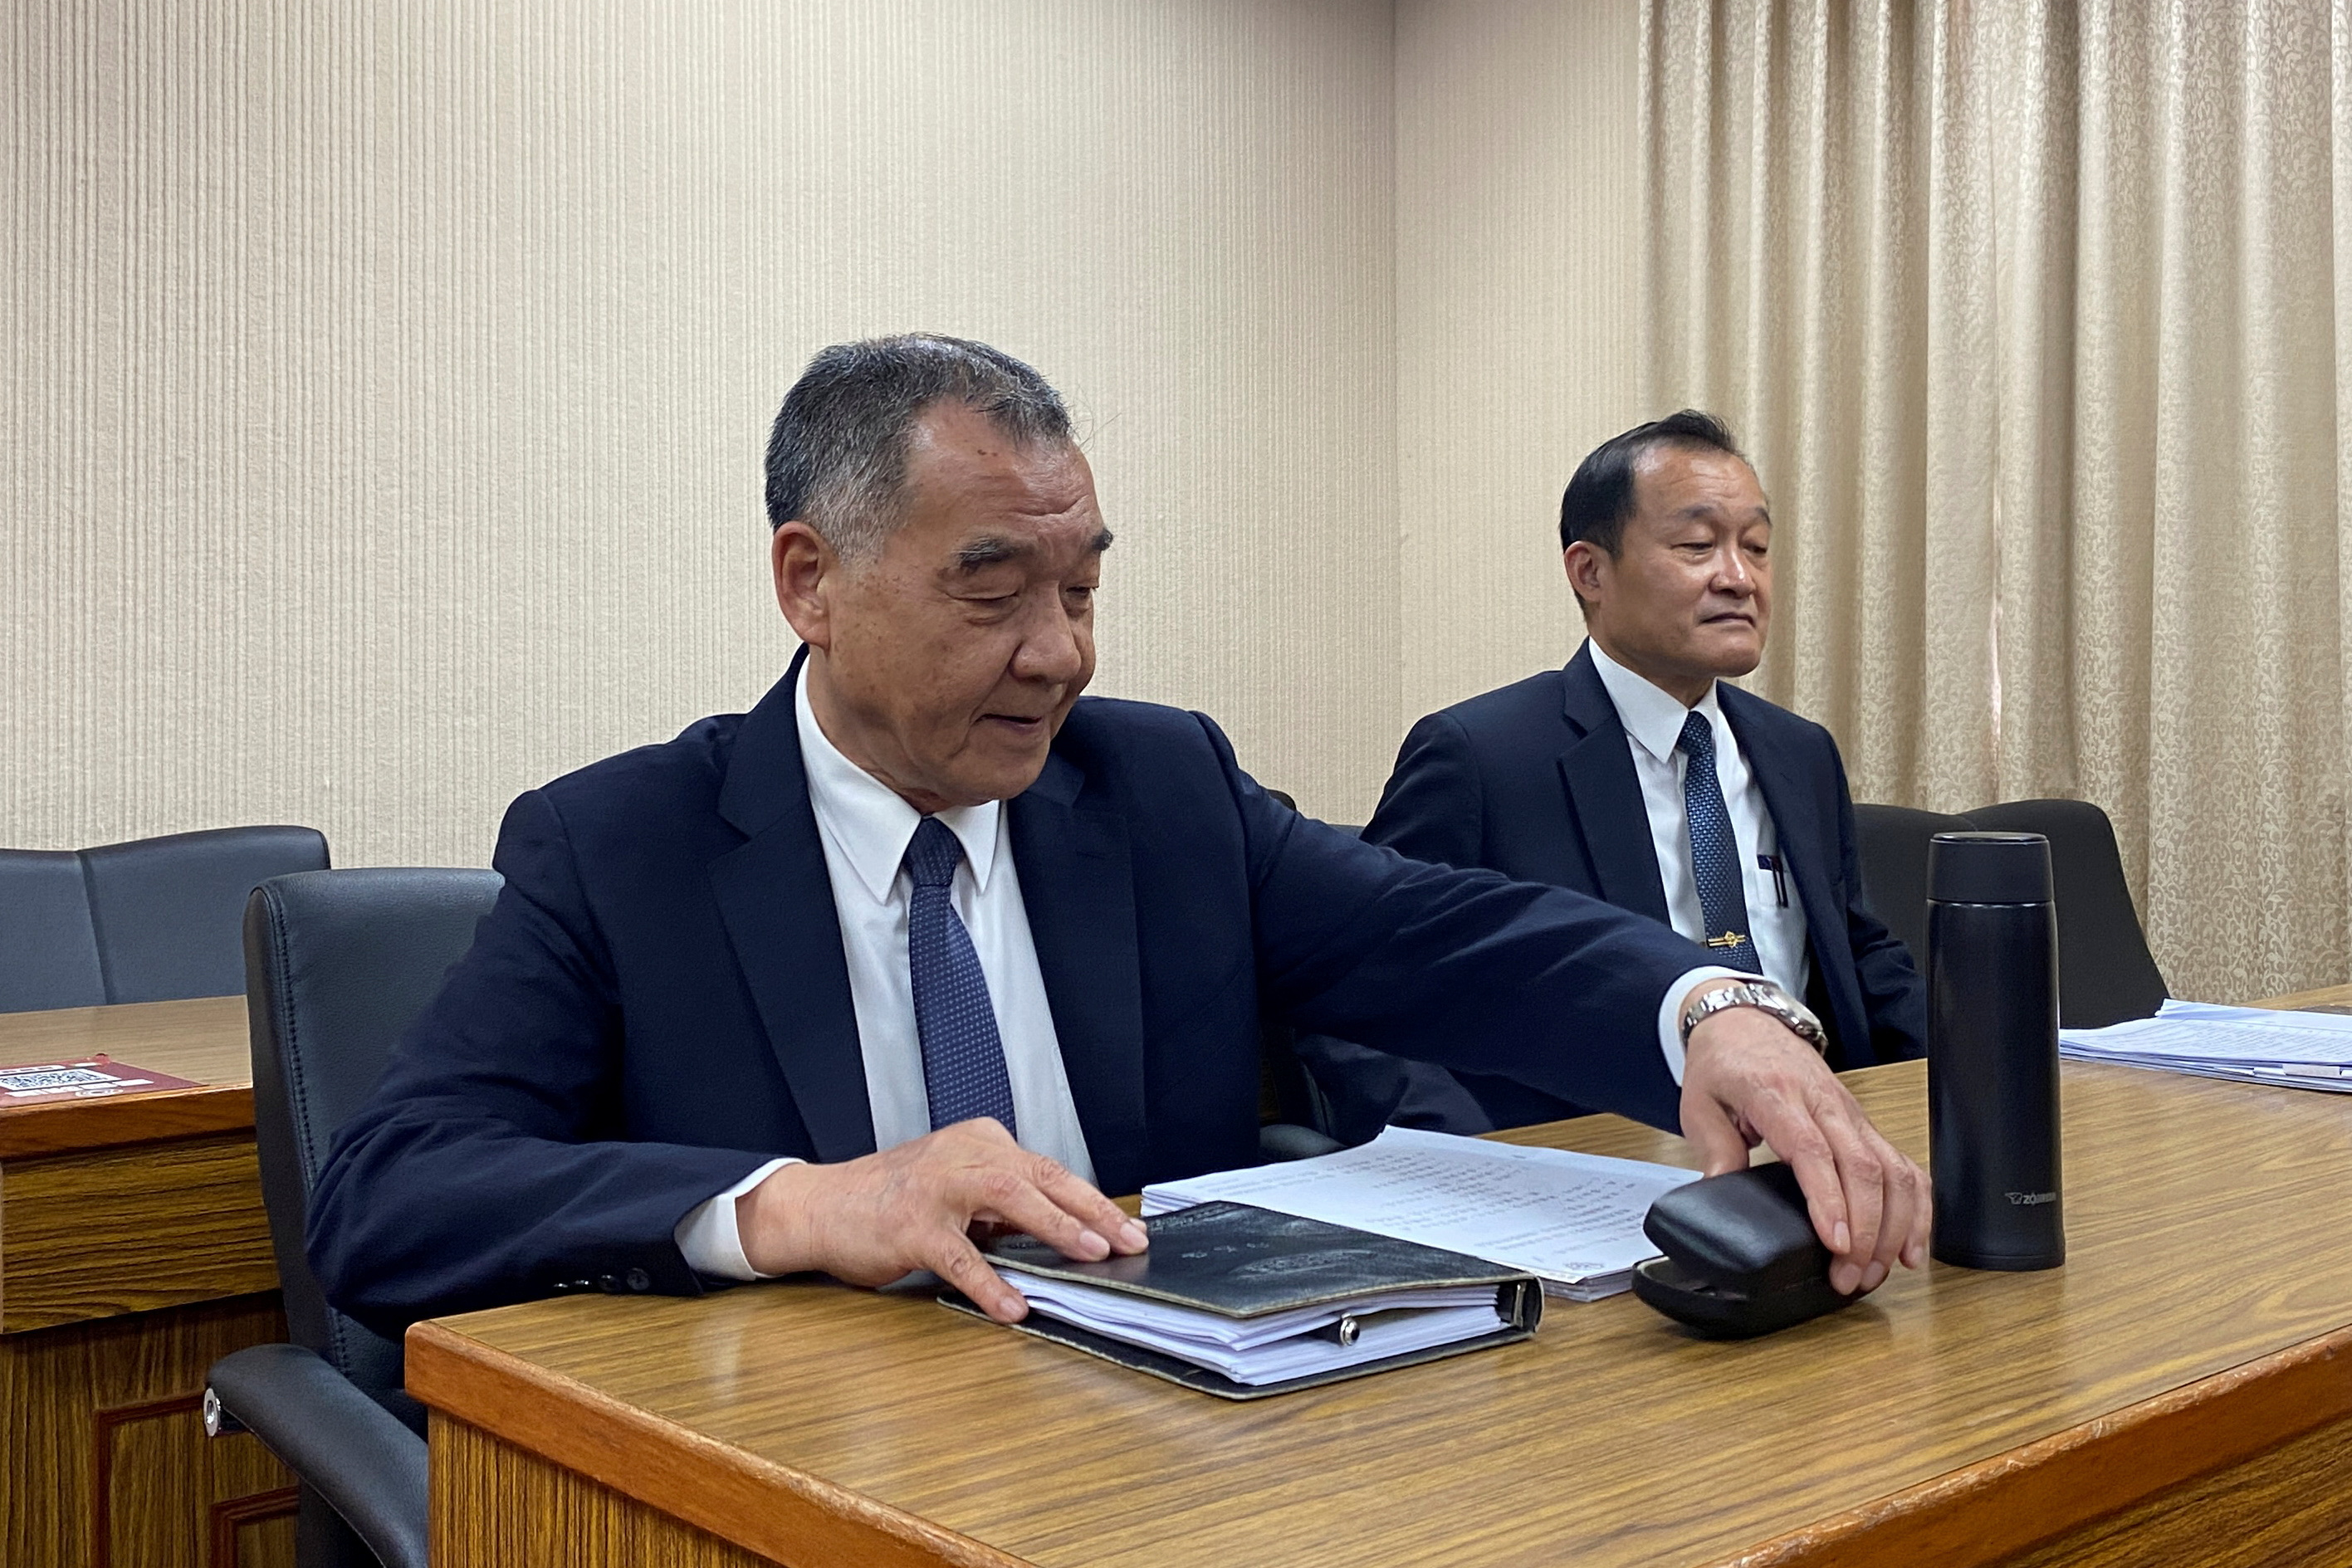 Taiwan Defence Minister Chiu Kuo-cheng attends a parliament session in Taipei